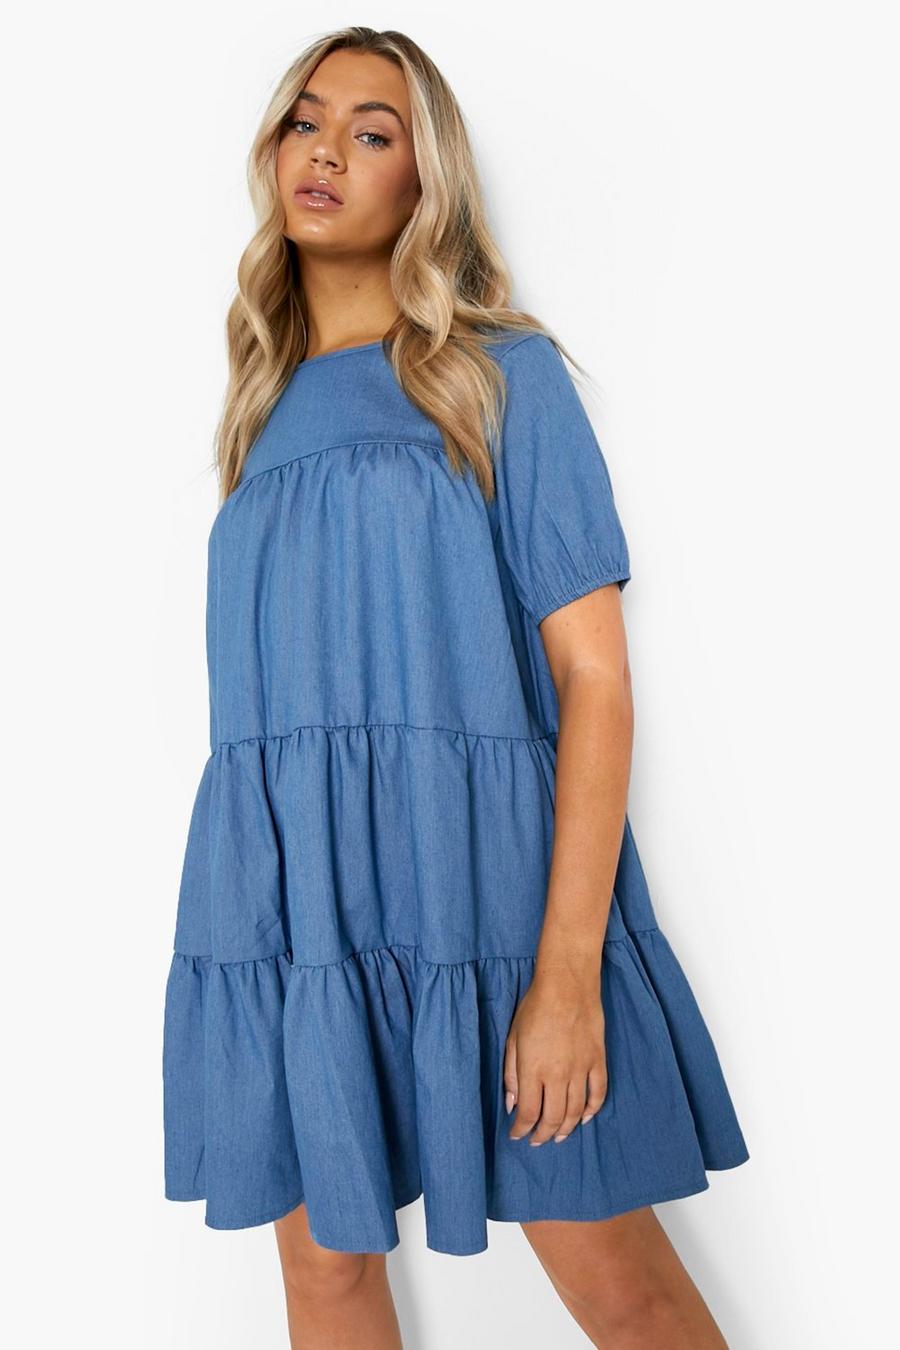 Mid blue Tiered Chambray Summer Dress